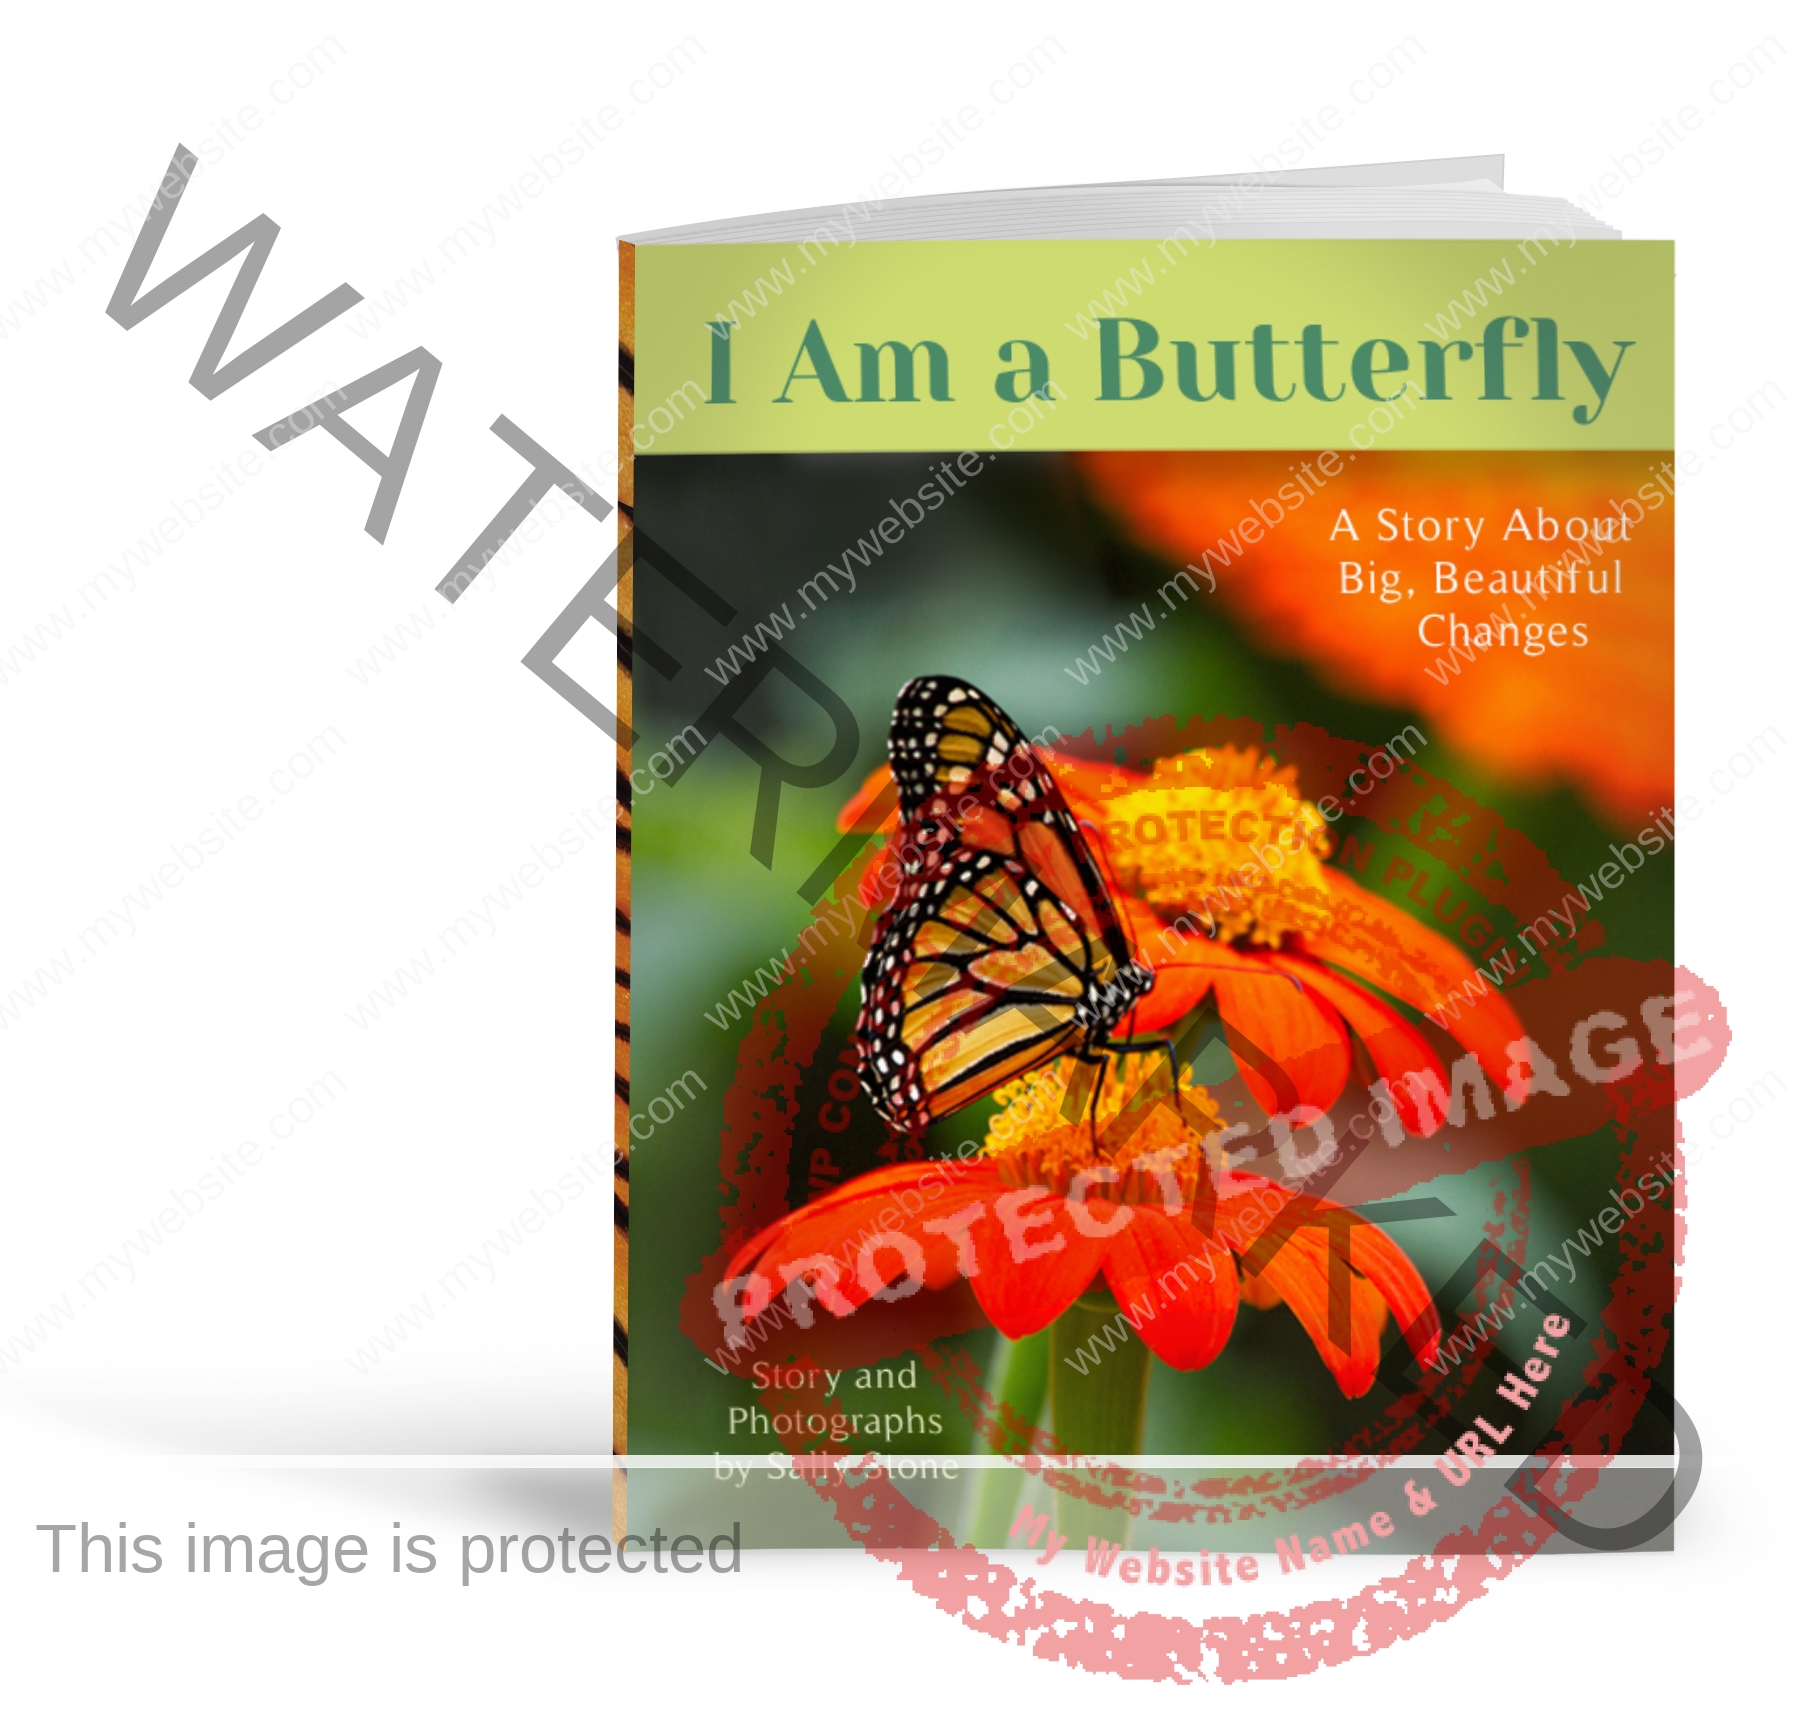 Book Cover mock-up - I Am a Butterfly picture book